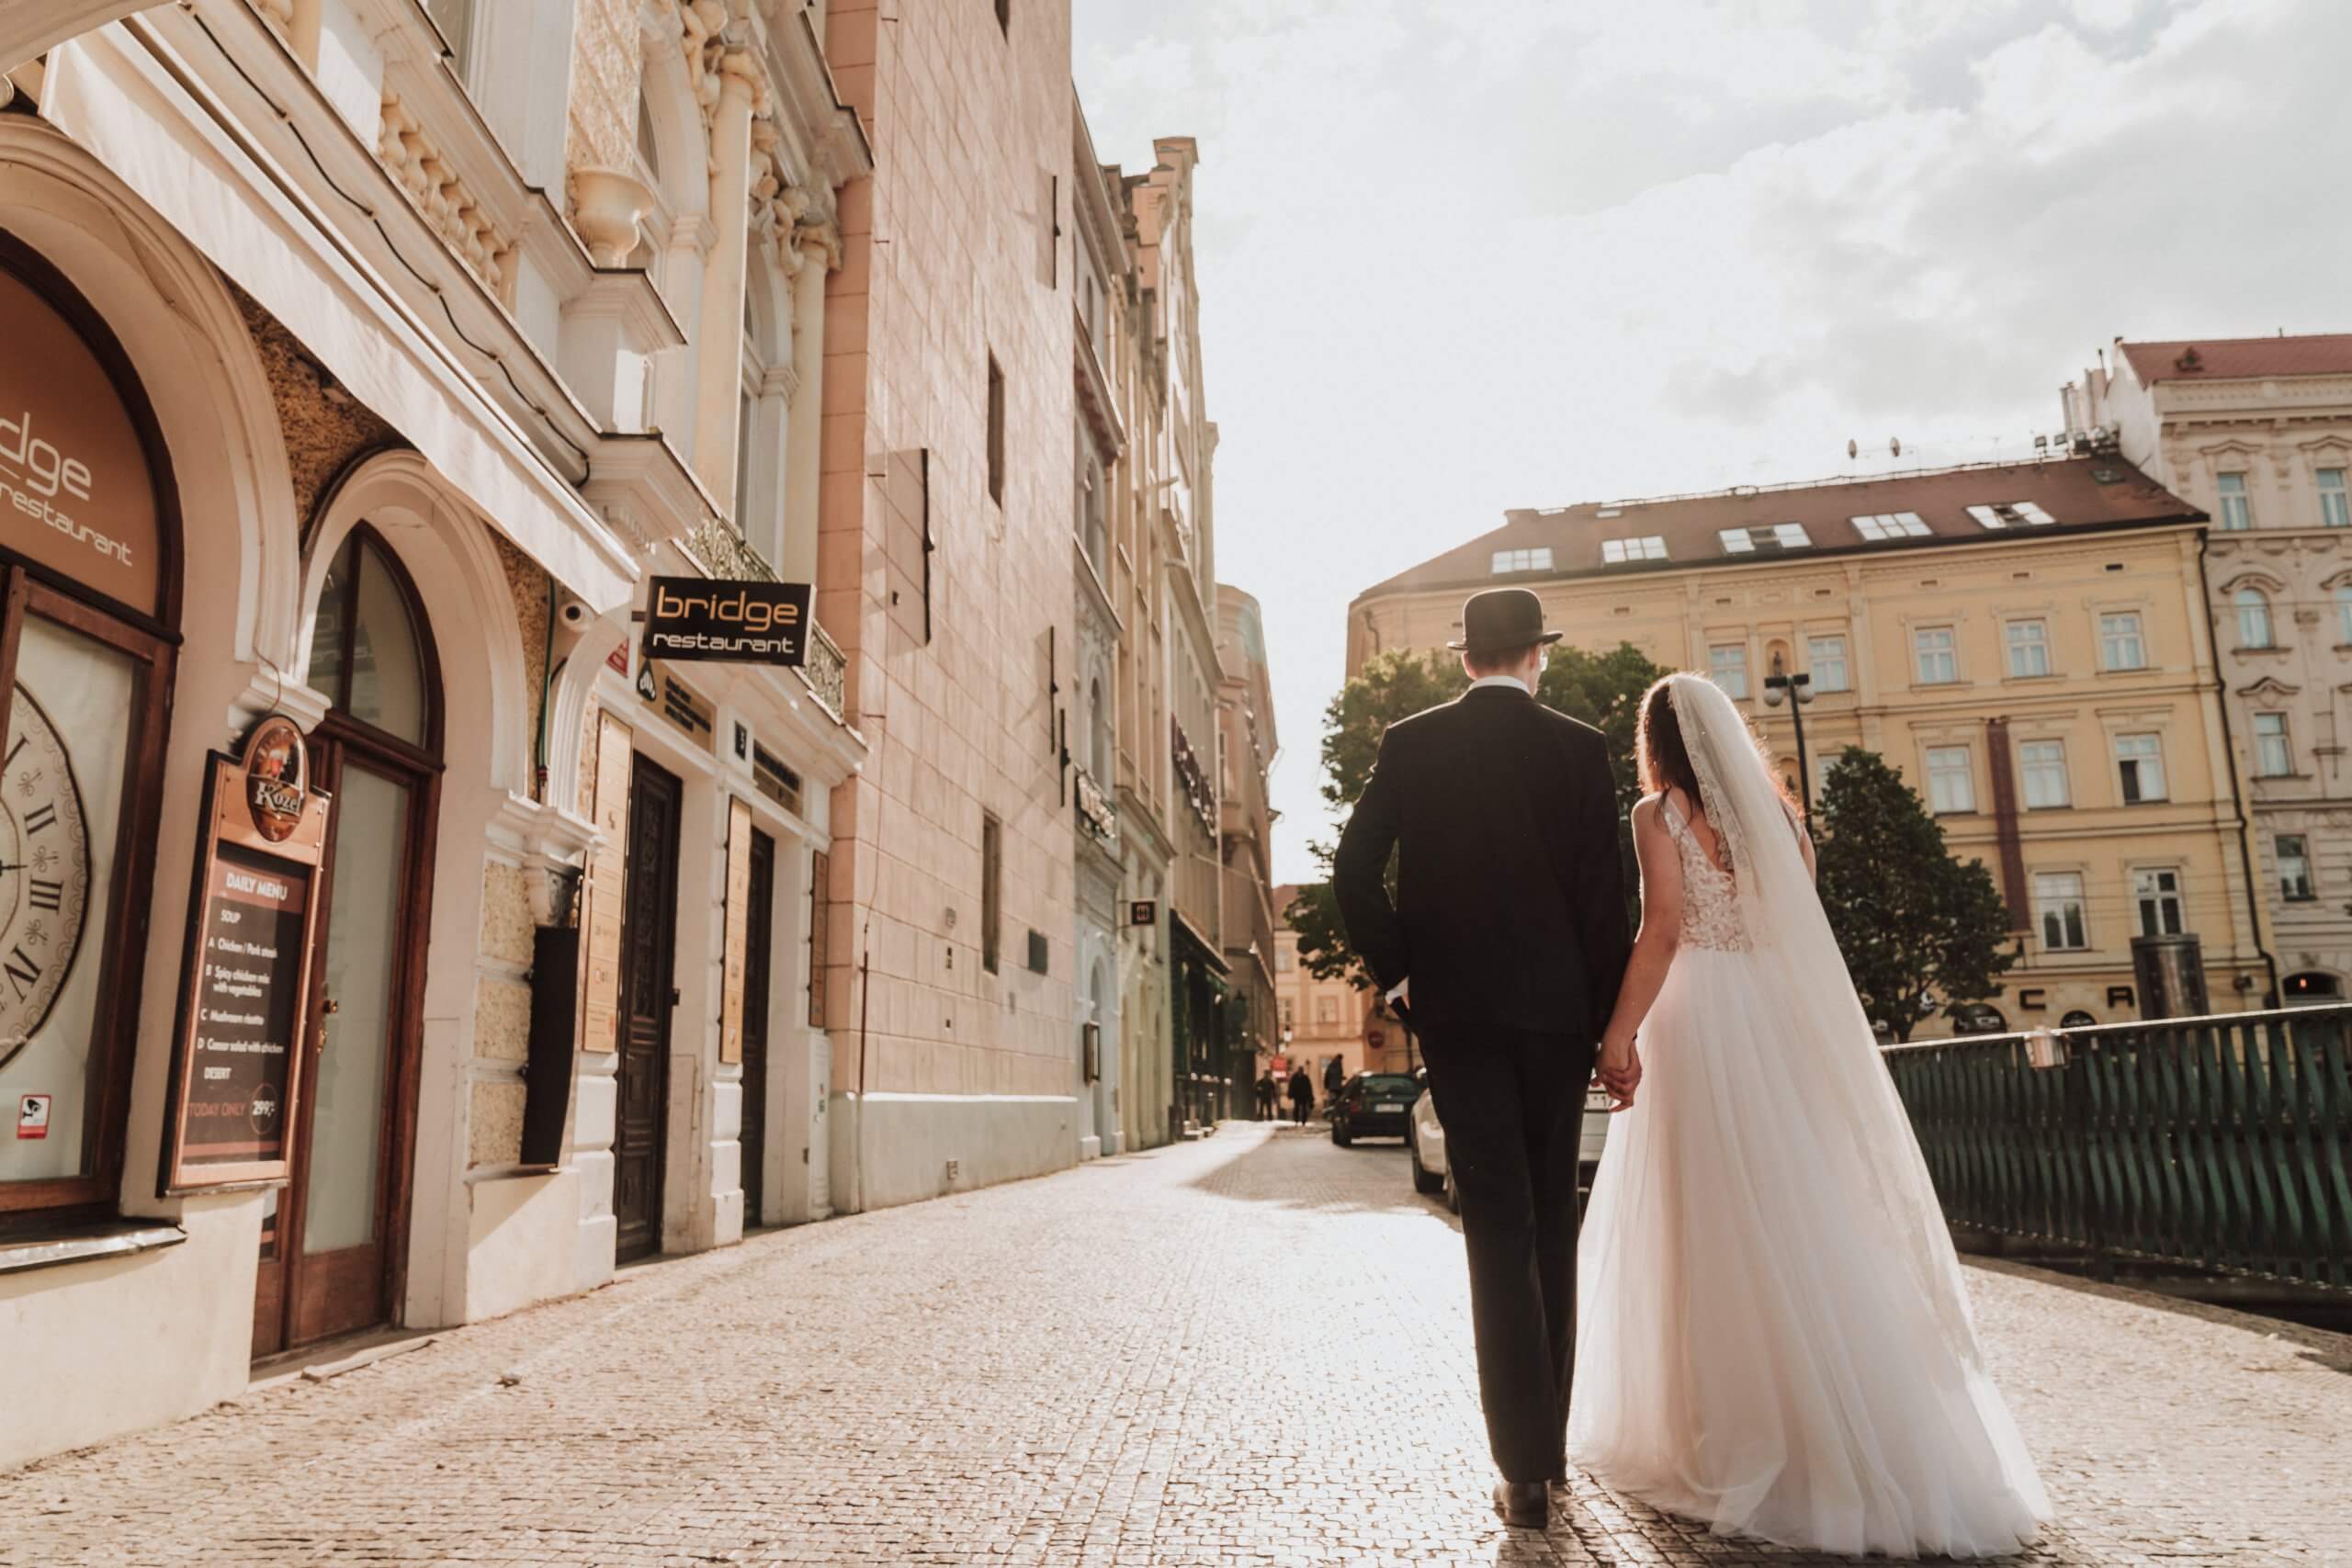 Bride and groom, hand in hand walks the streets of Prague.